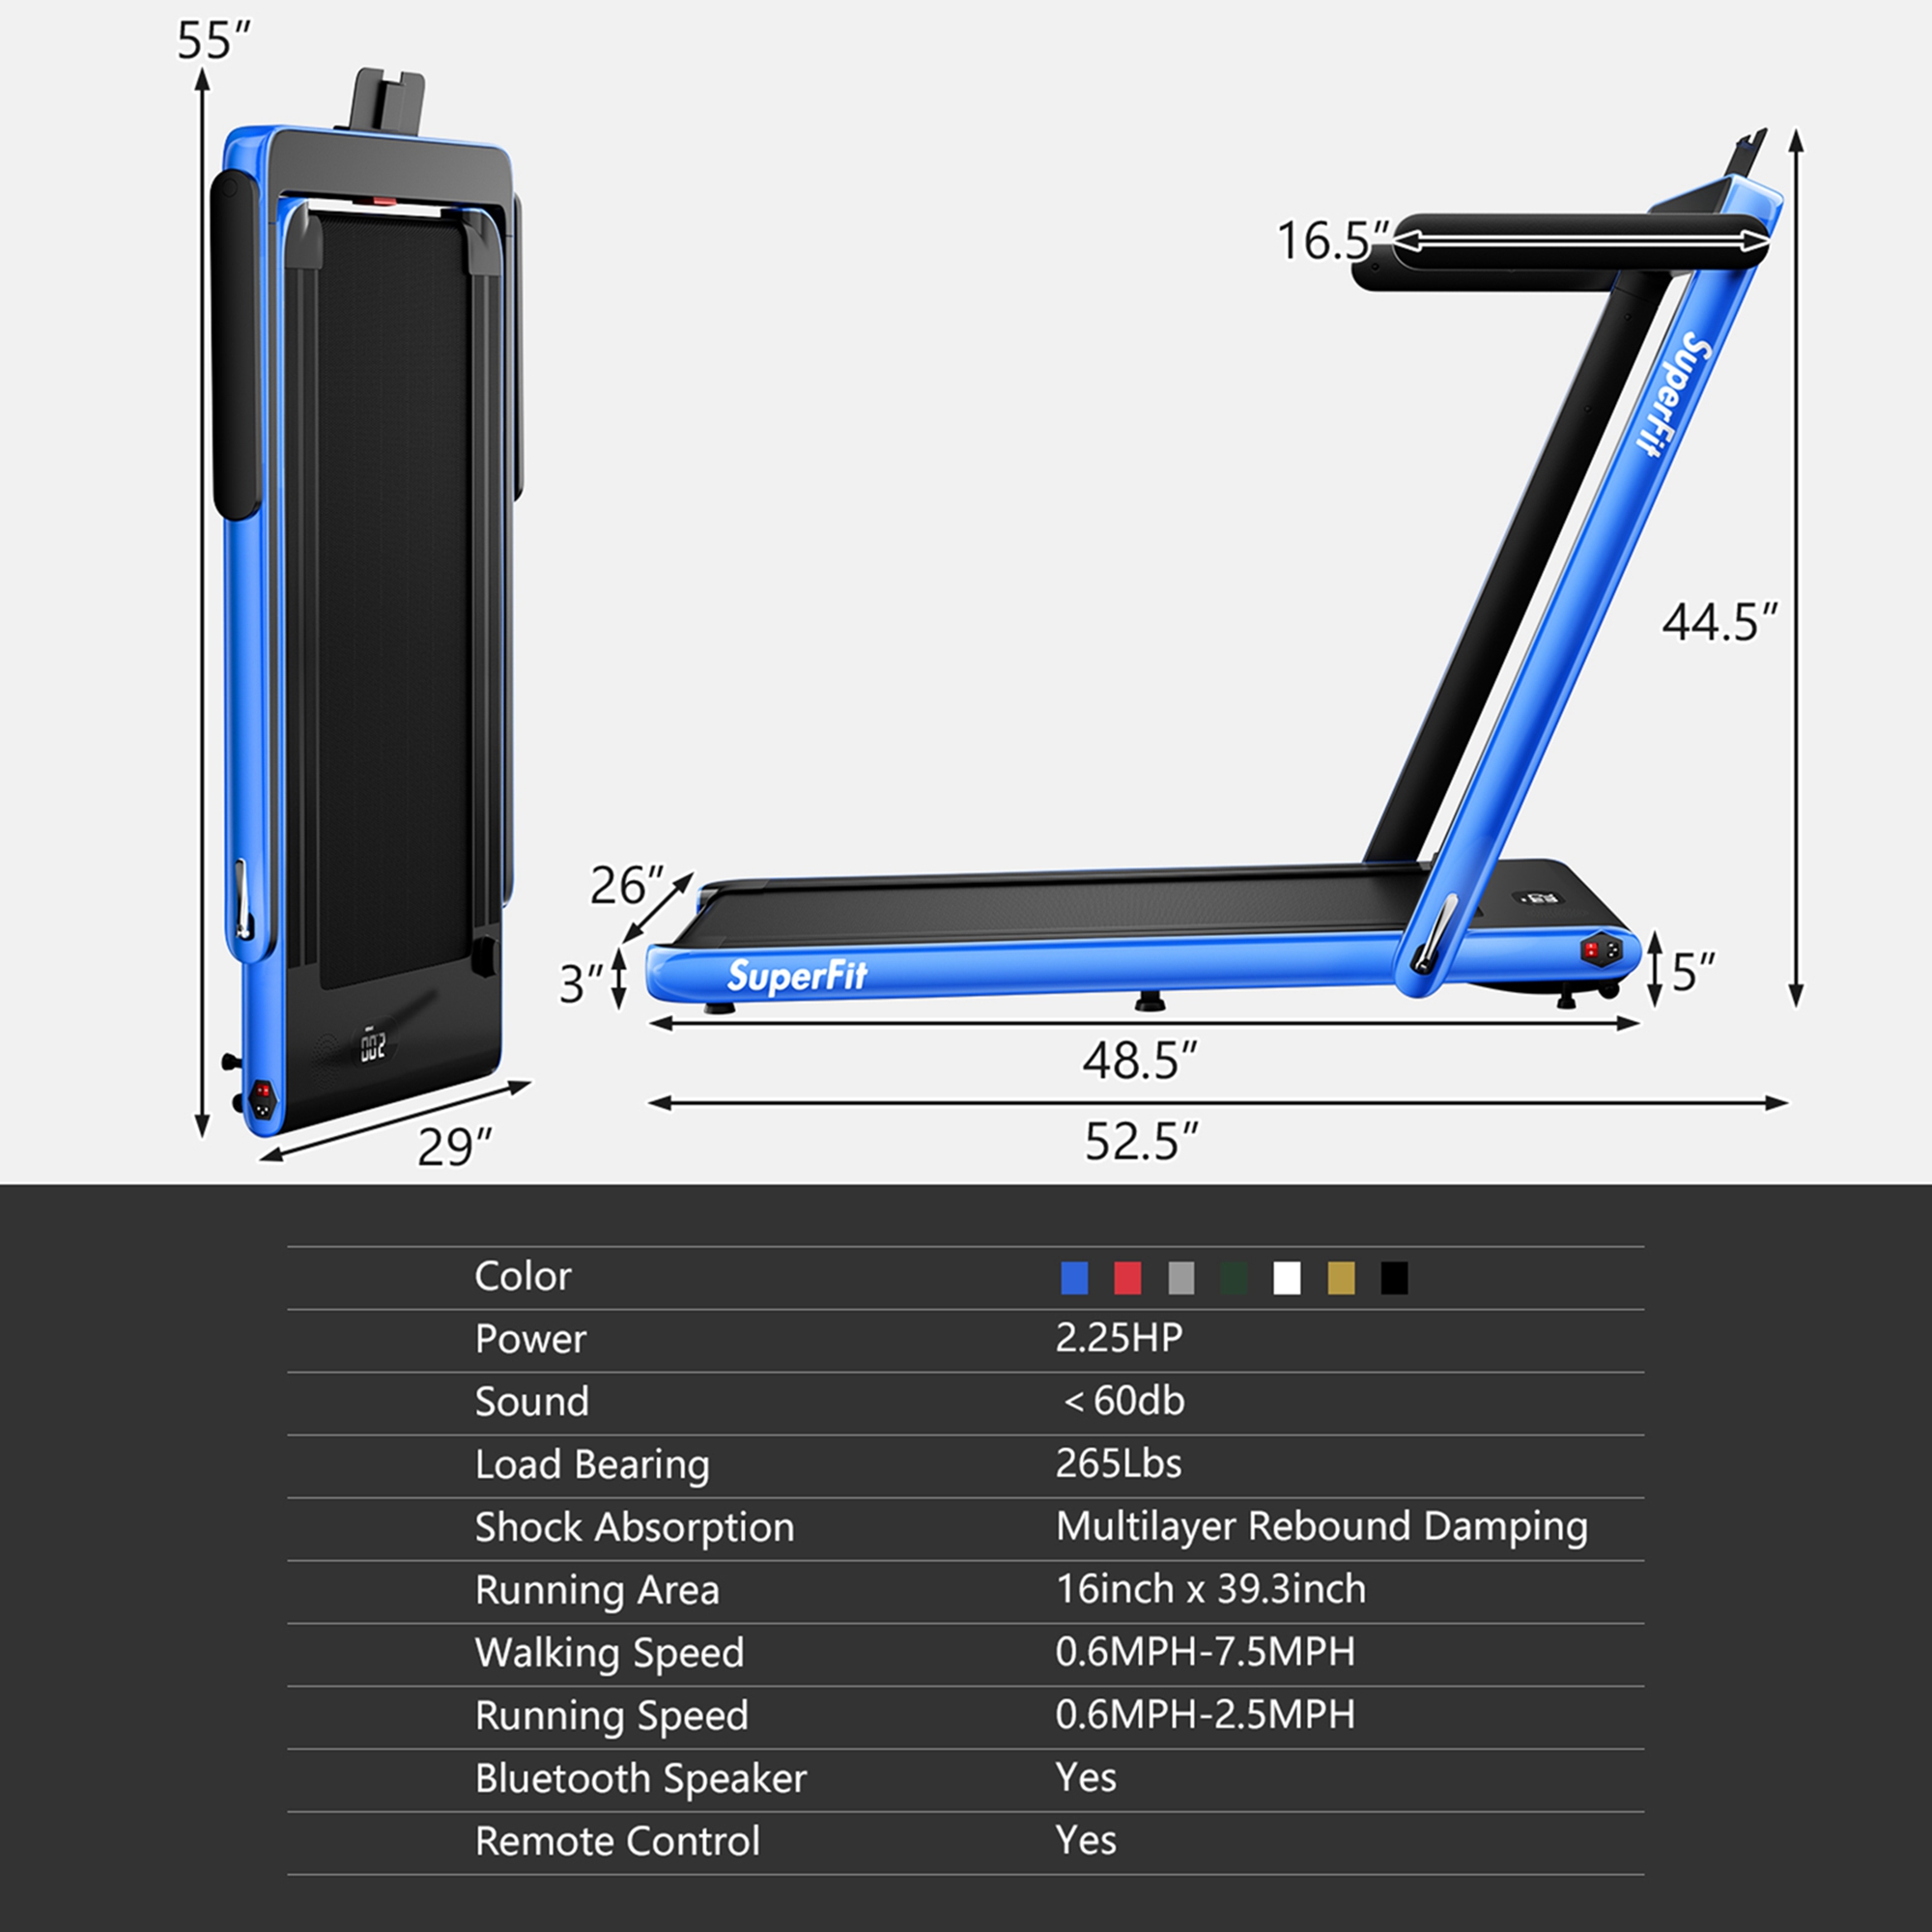 SuperFit Up To 7.5MPH 2.25HP 2 in 1 Single Display Screen Folding Treadmill W/ APP Control Speaker Remote Control Blue - image 10 of 10